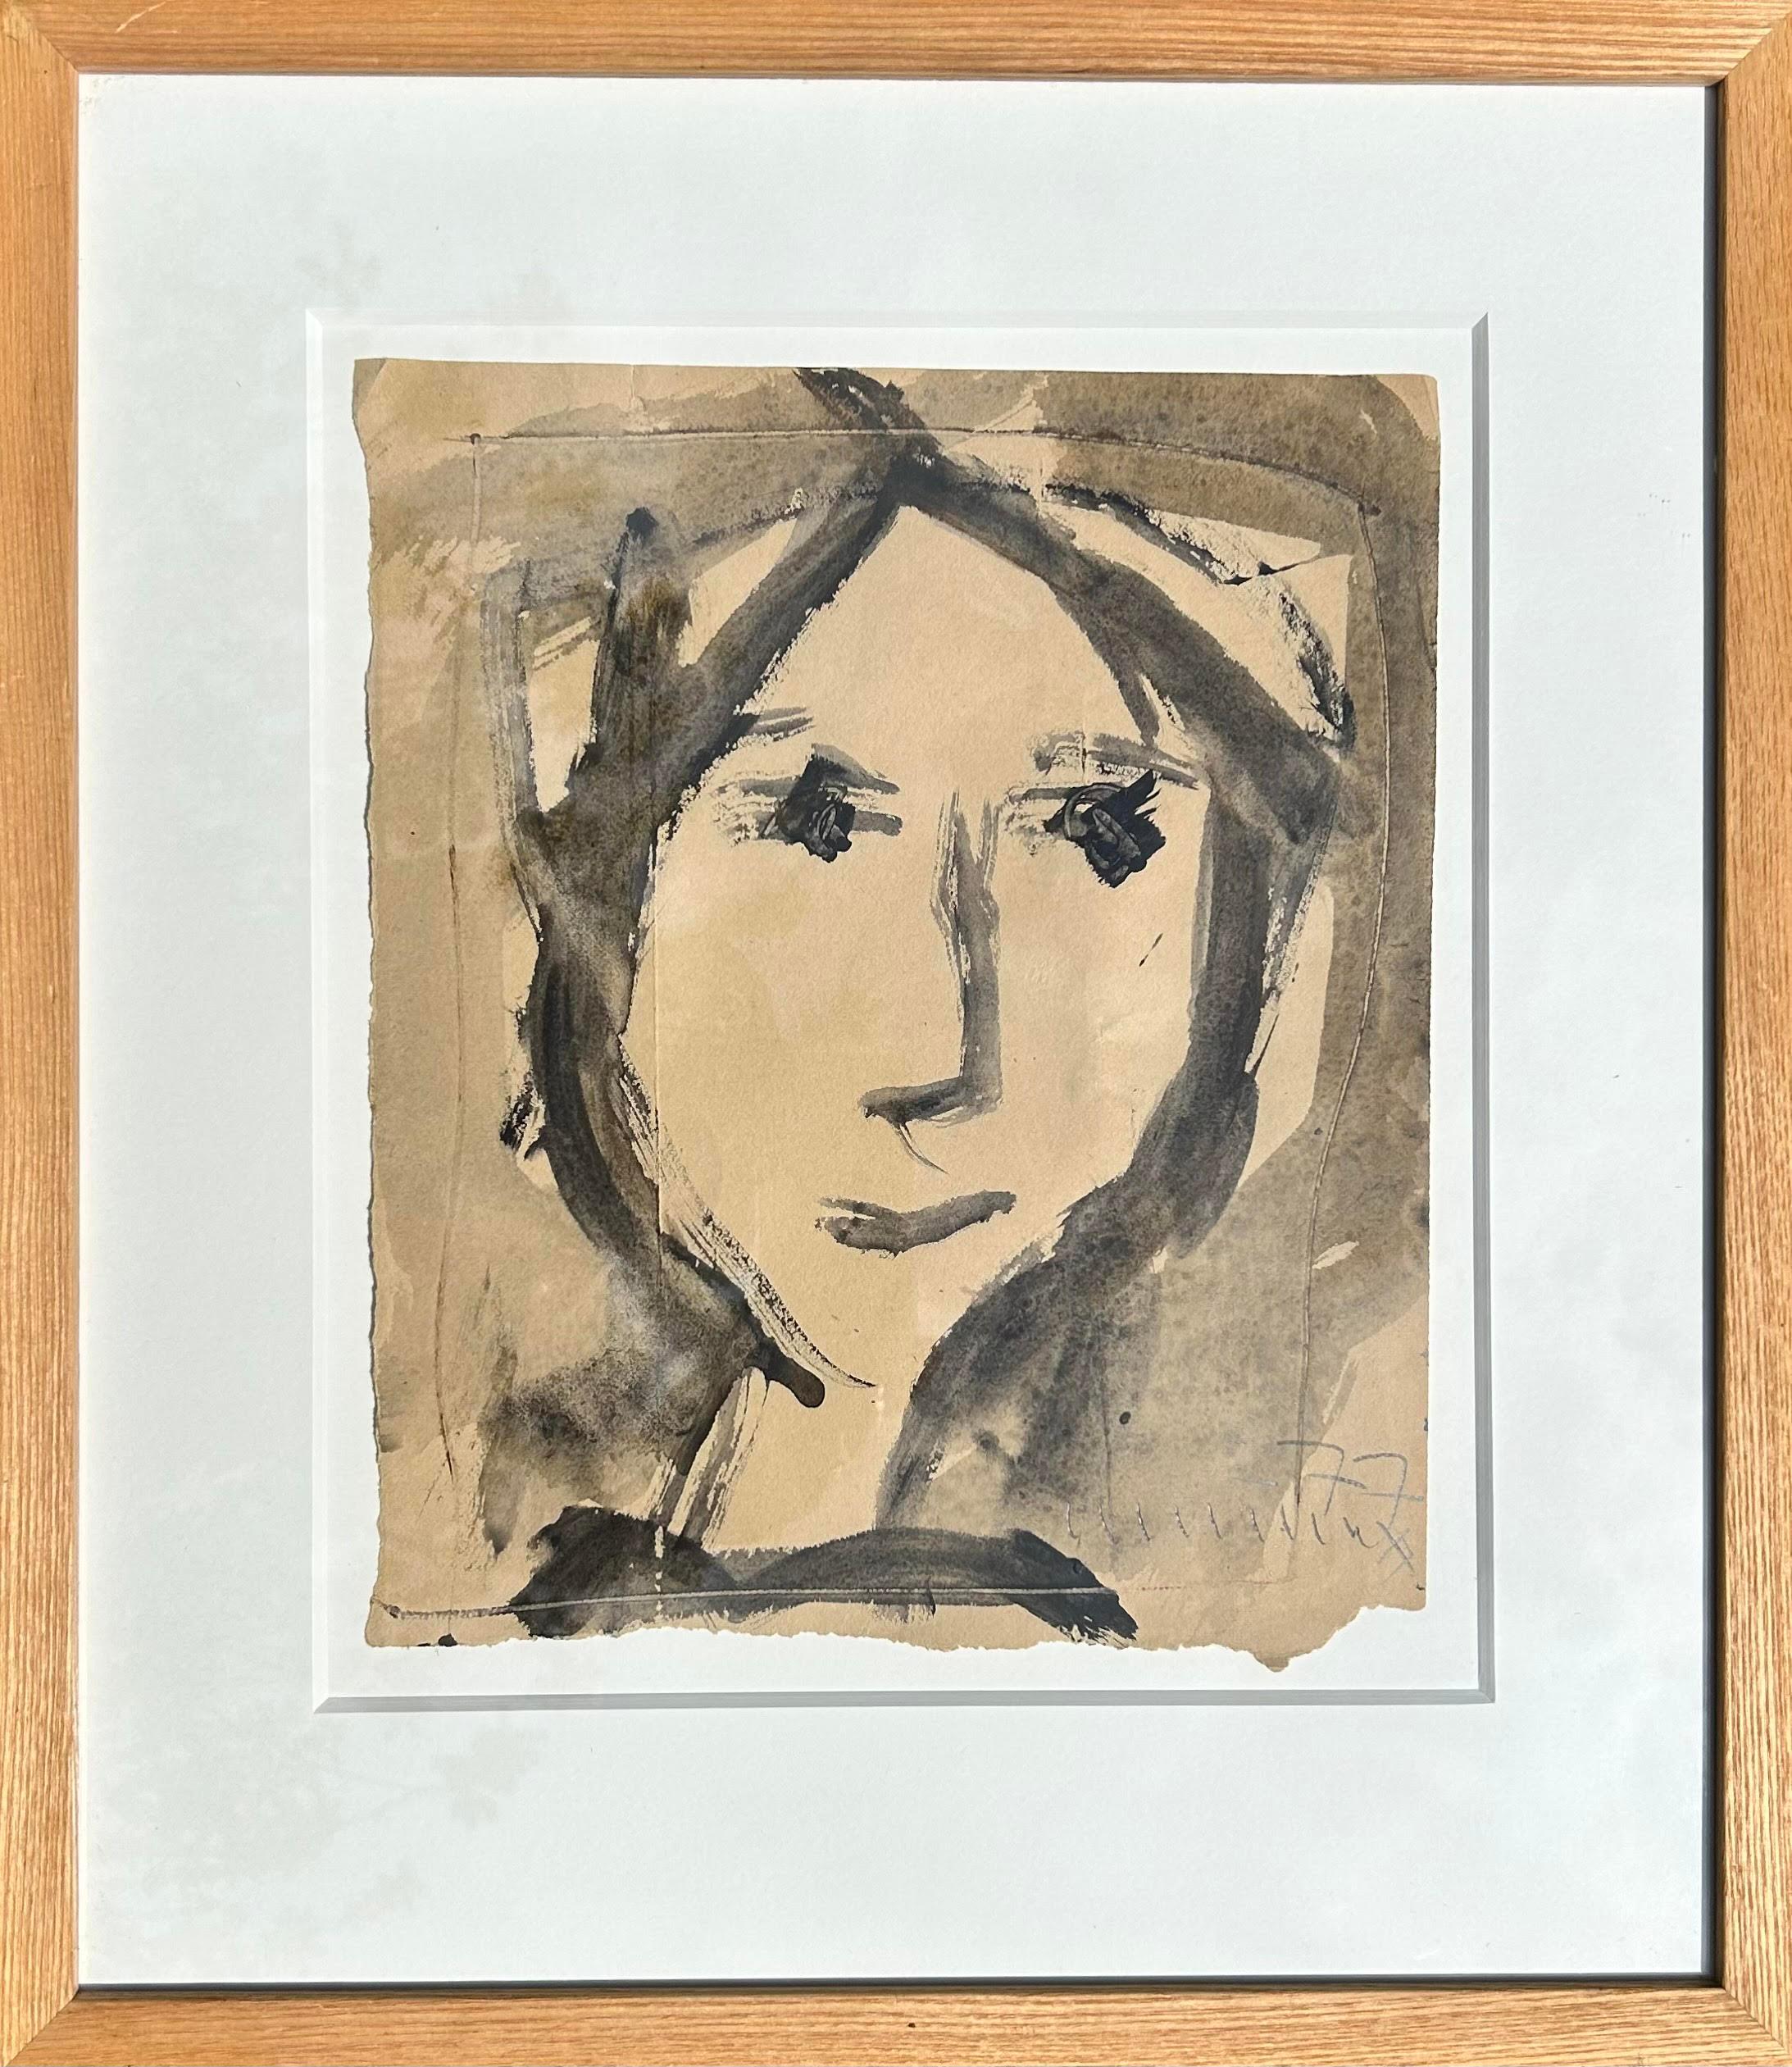 This portrait has a naïve and gentle charm to it. To my eye it looks like a woman but it could equally be any gender or age. Perhaps this is the beauty of Turner Durrant's abstraction. The materiality is more distinct when you see the piece in the